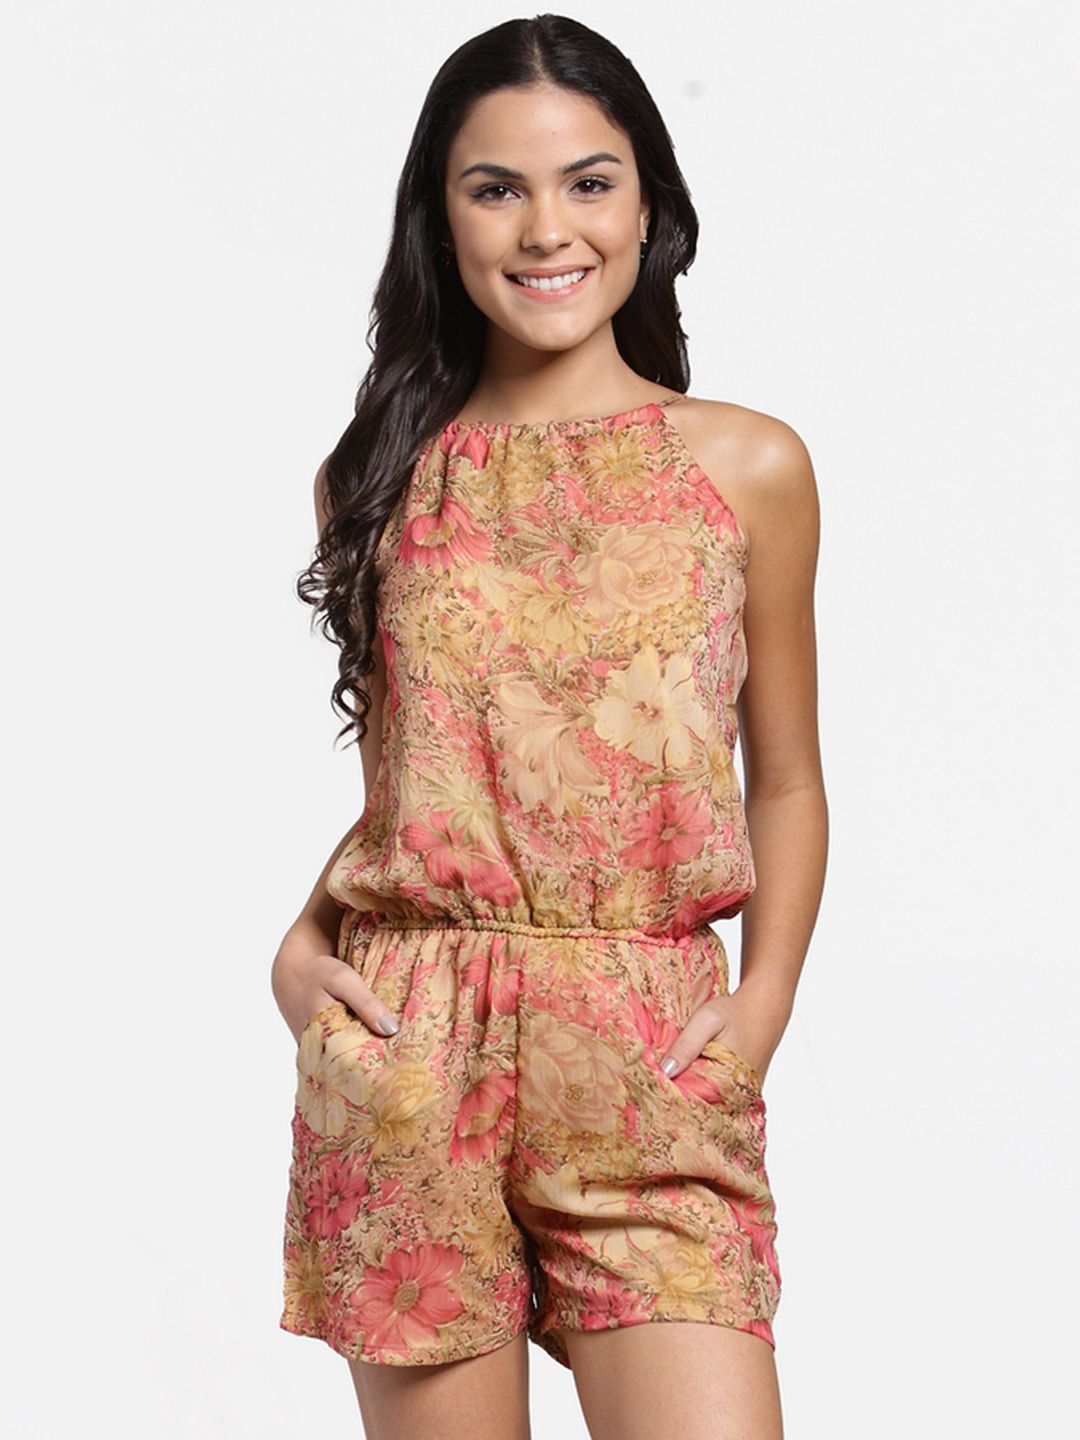 Cation Nude-Coloured Floral Print Playsuit Price in India